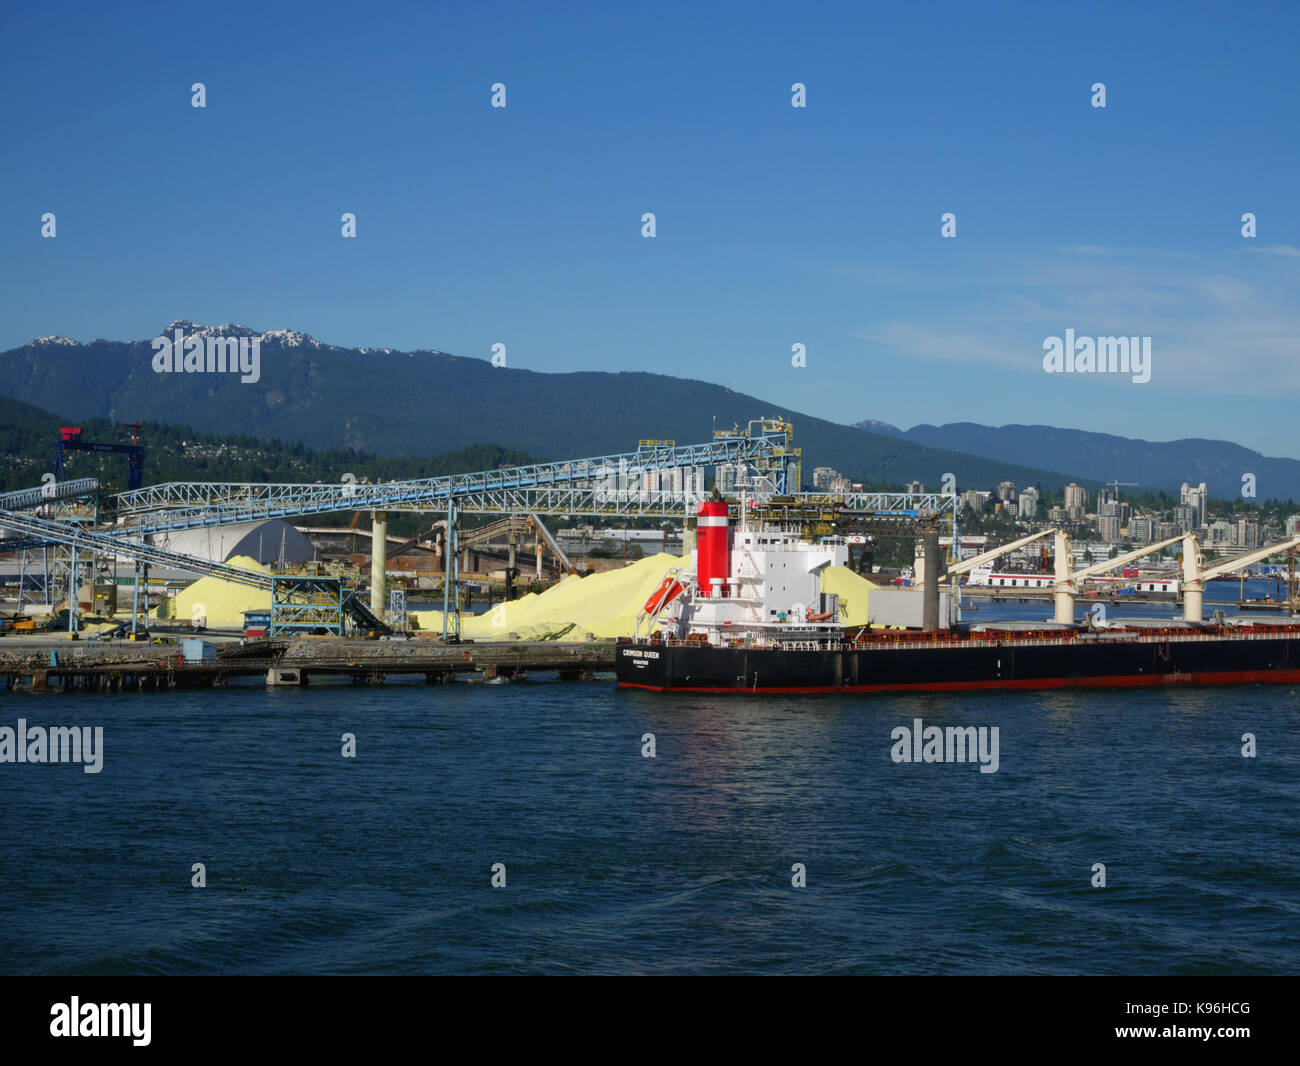 A pile of sulphur ready for loading onto ships at the Port of Vancouver, BC, Canada. Stock Photo